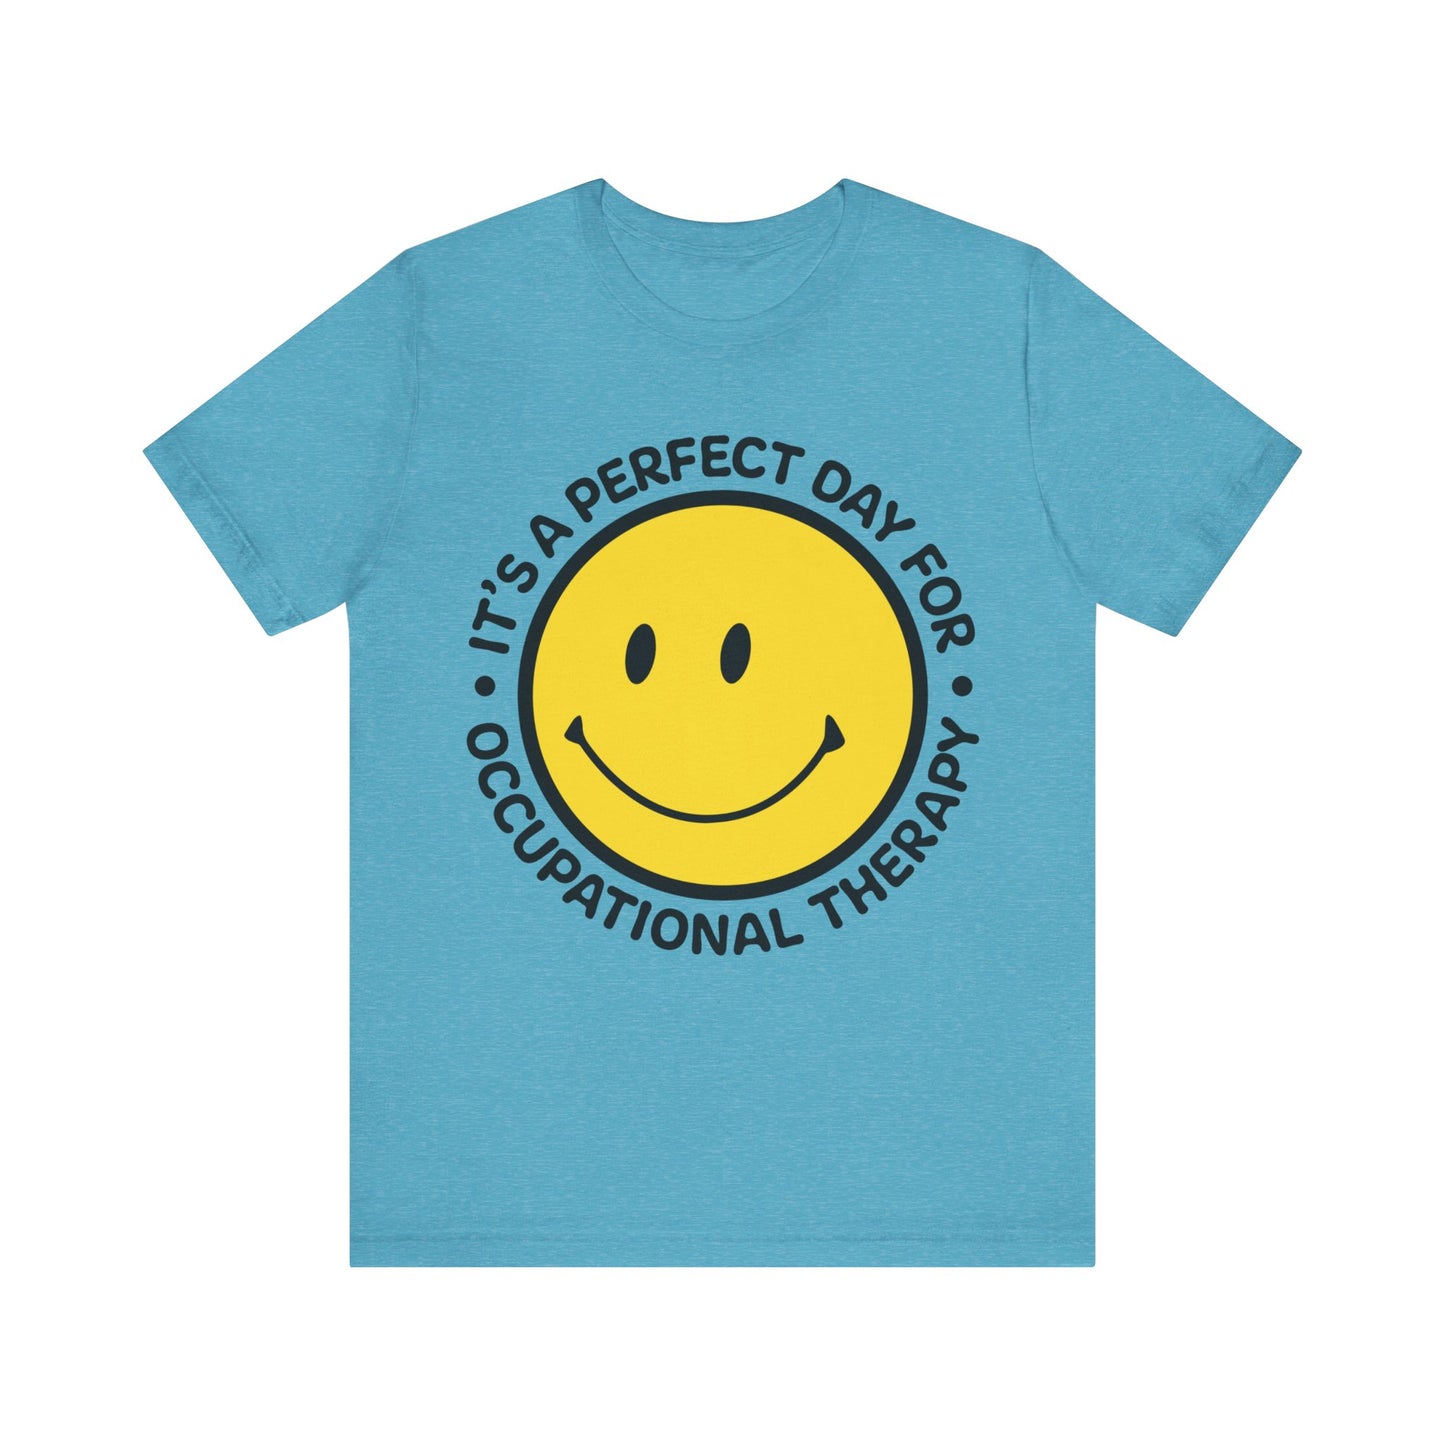 It's A Perfect Day For Occupational Therapy Shirt, OT Shirt, Therapist Shirt